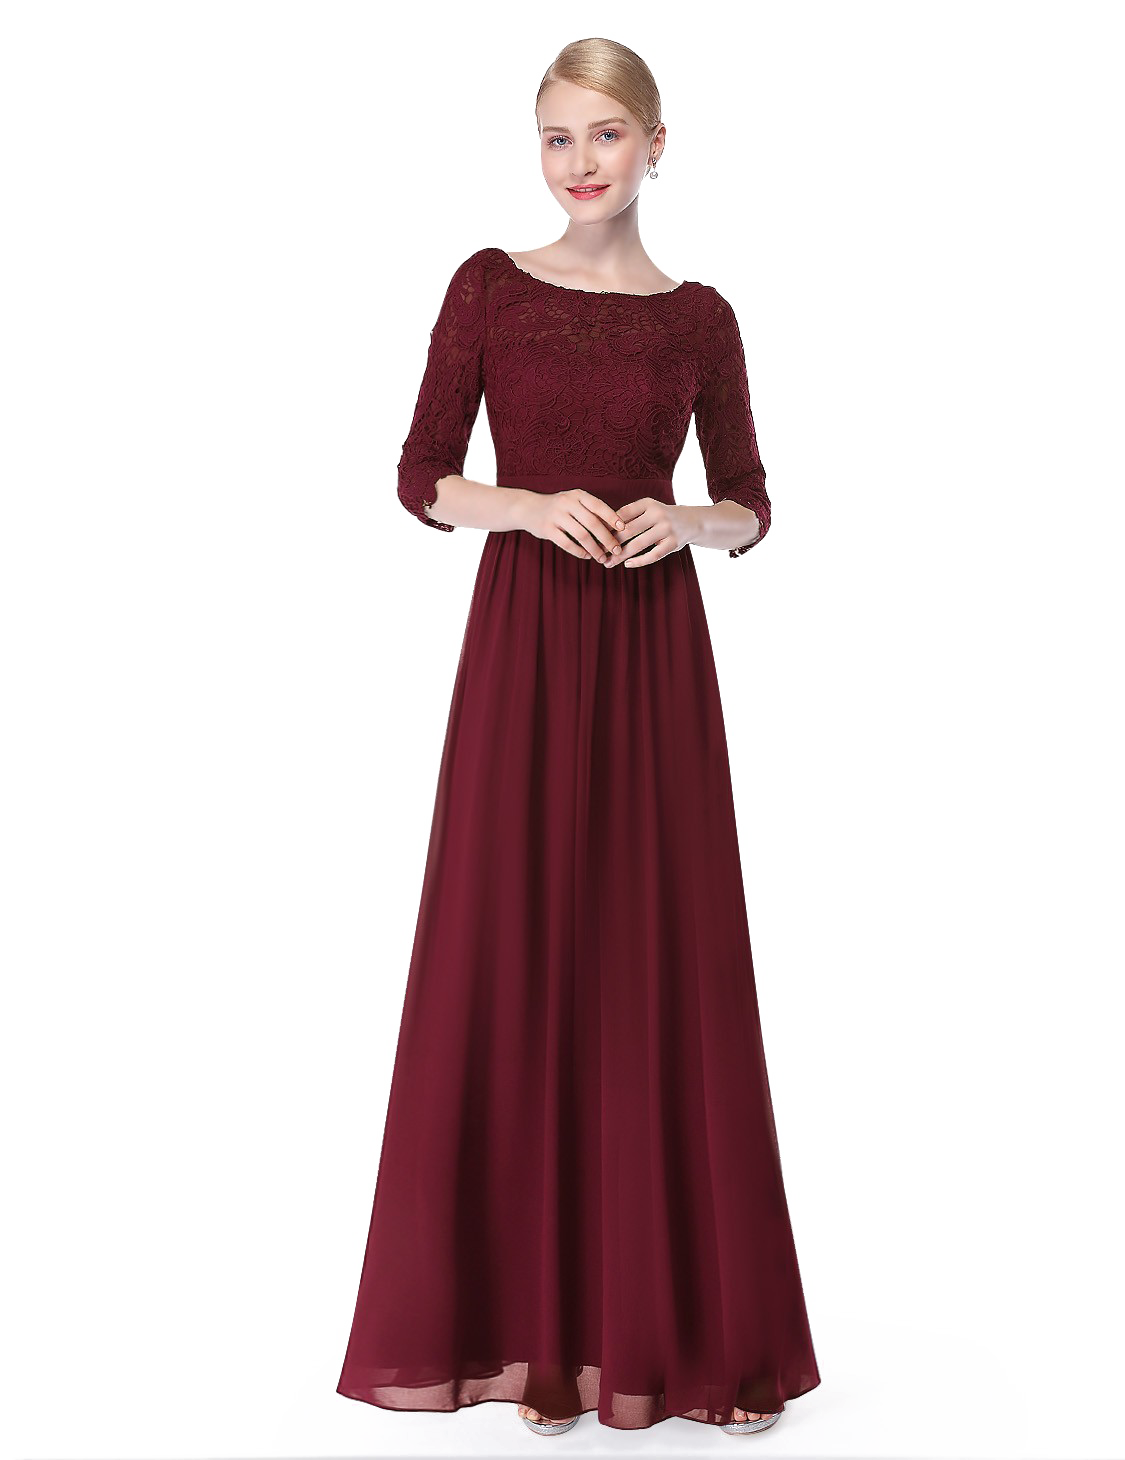 Long Sleeve Dress PNG Free Download